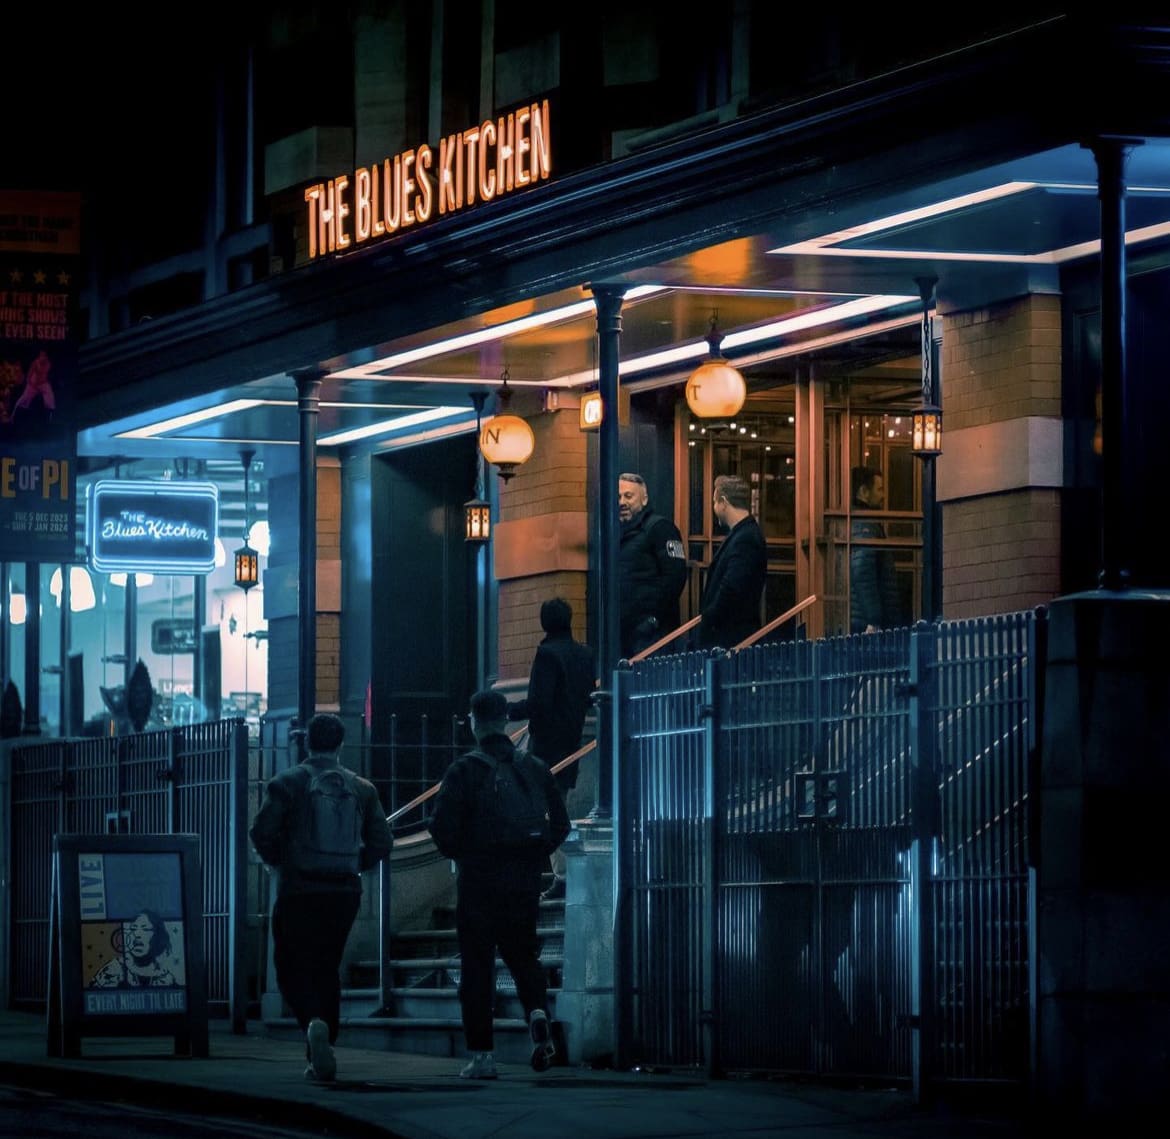 Blues Kitchen - The 12 Best Nightclubs in Manchester, England